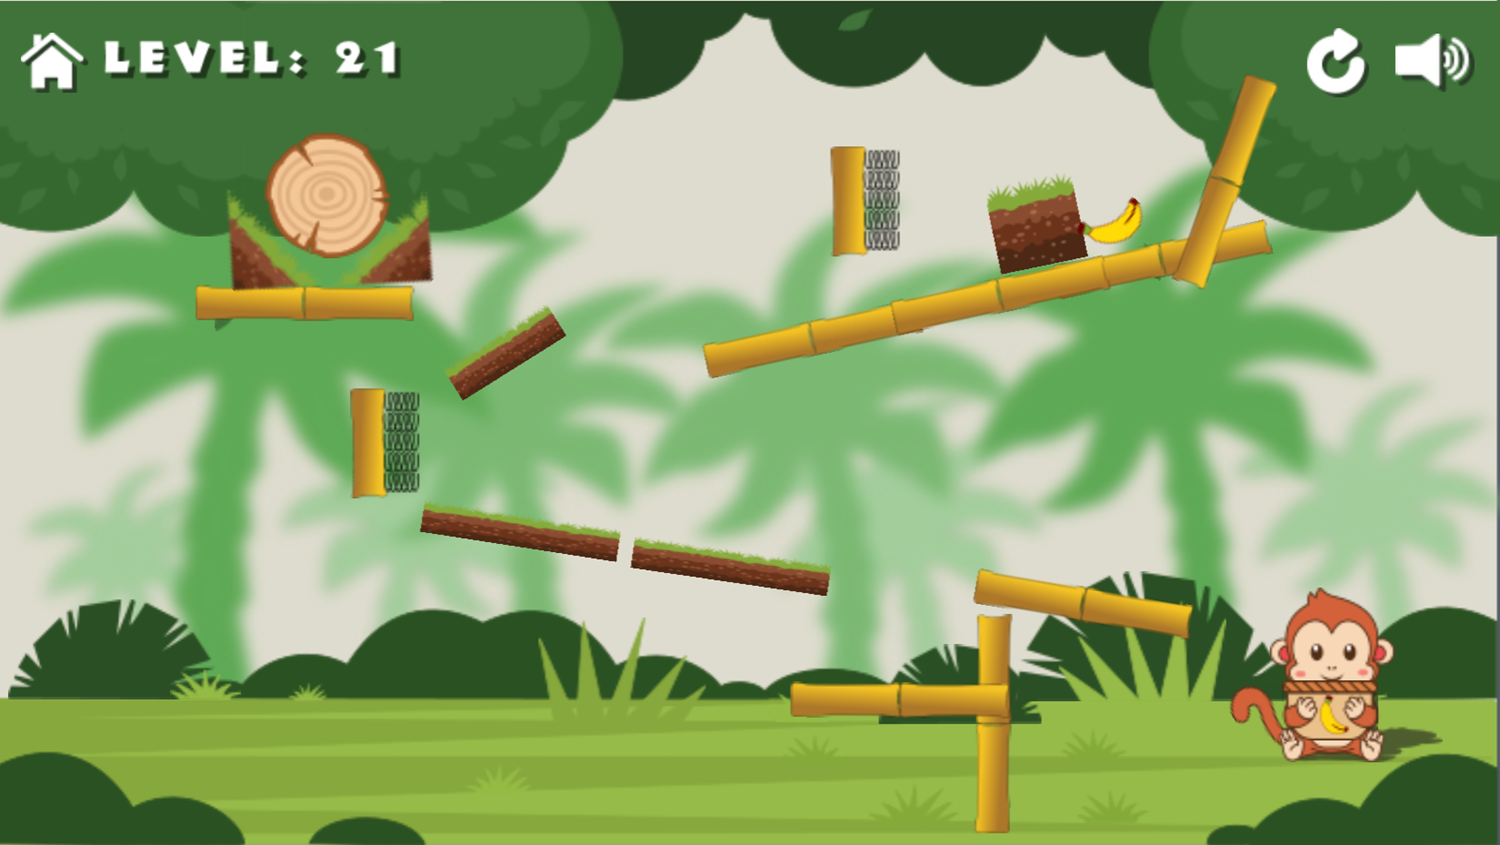 Monkeys and Fruits Game Level With a Gap to Fill In Screenshot.